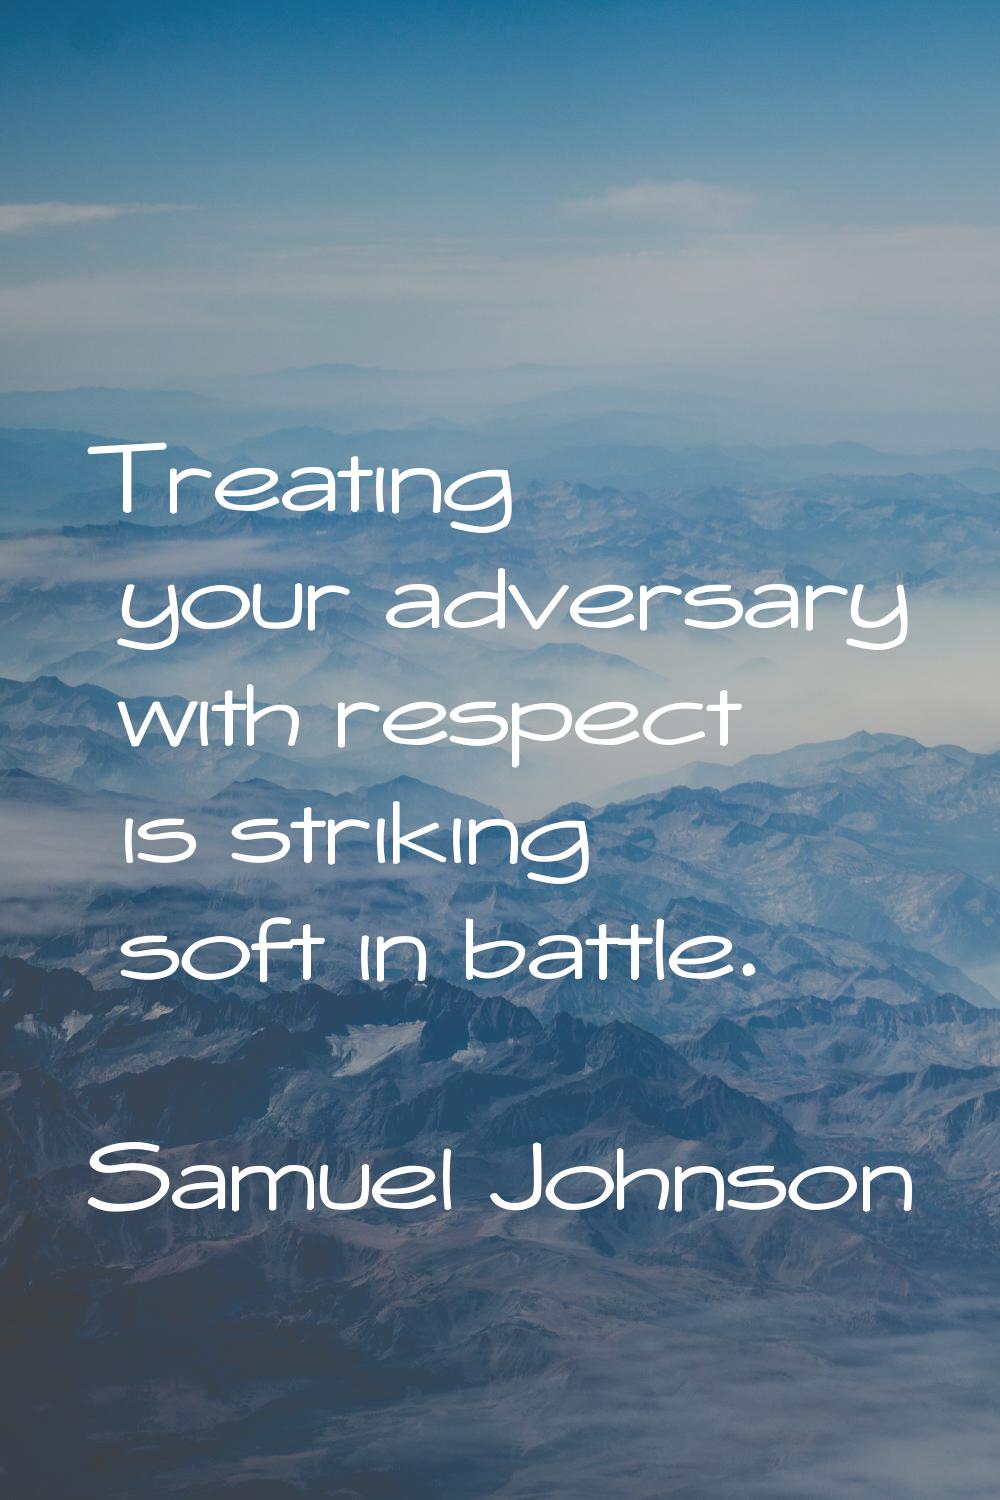 Treating your adversary with respect is striking soft in battle.